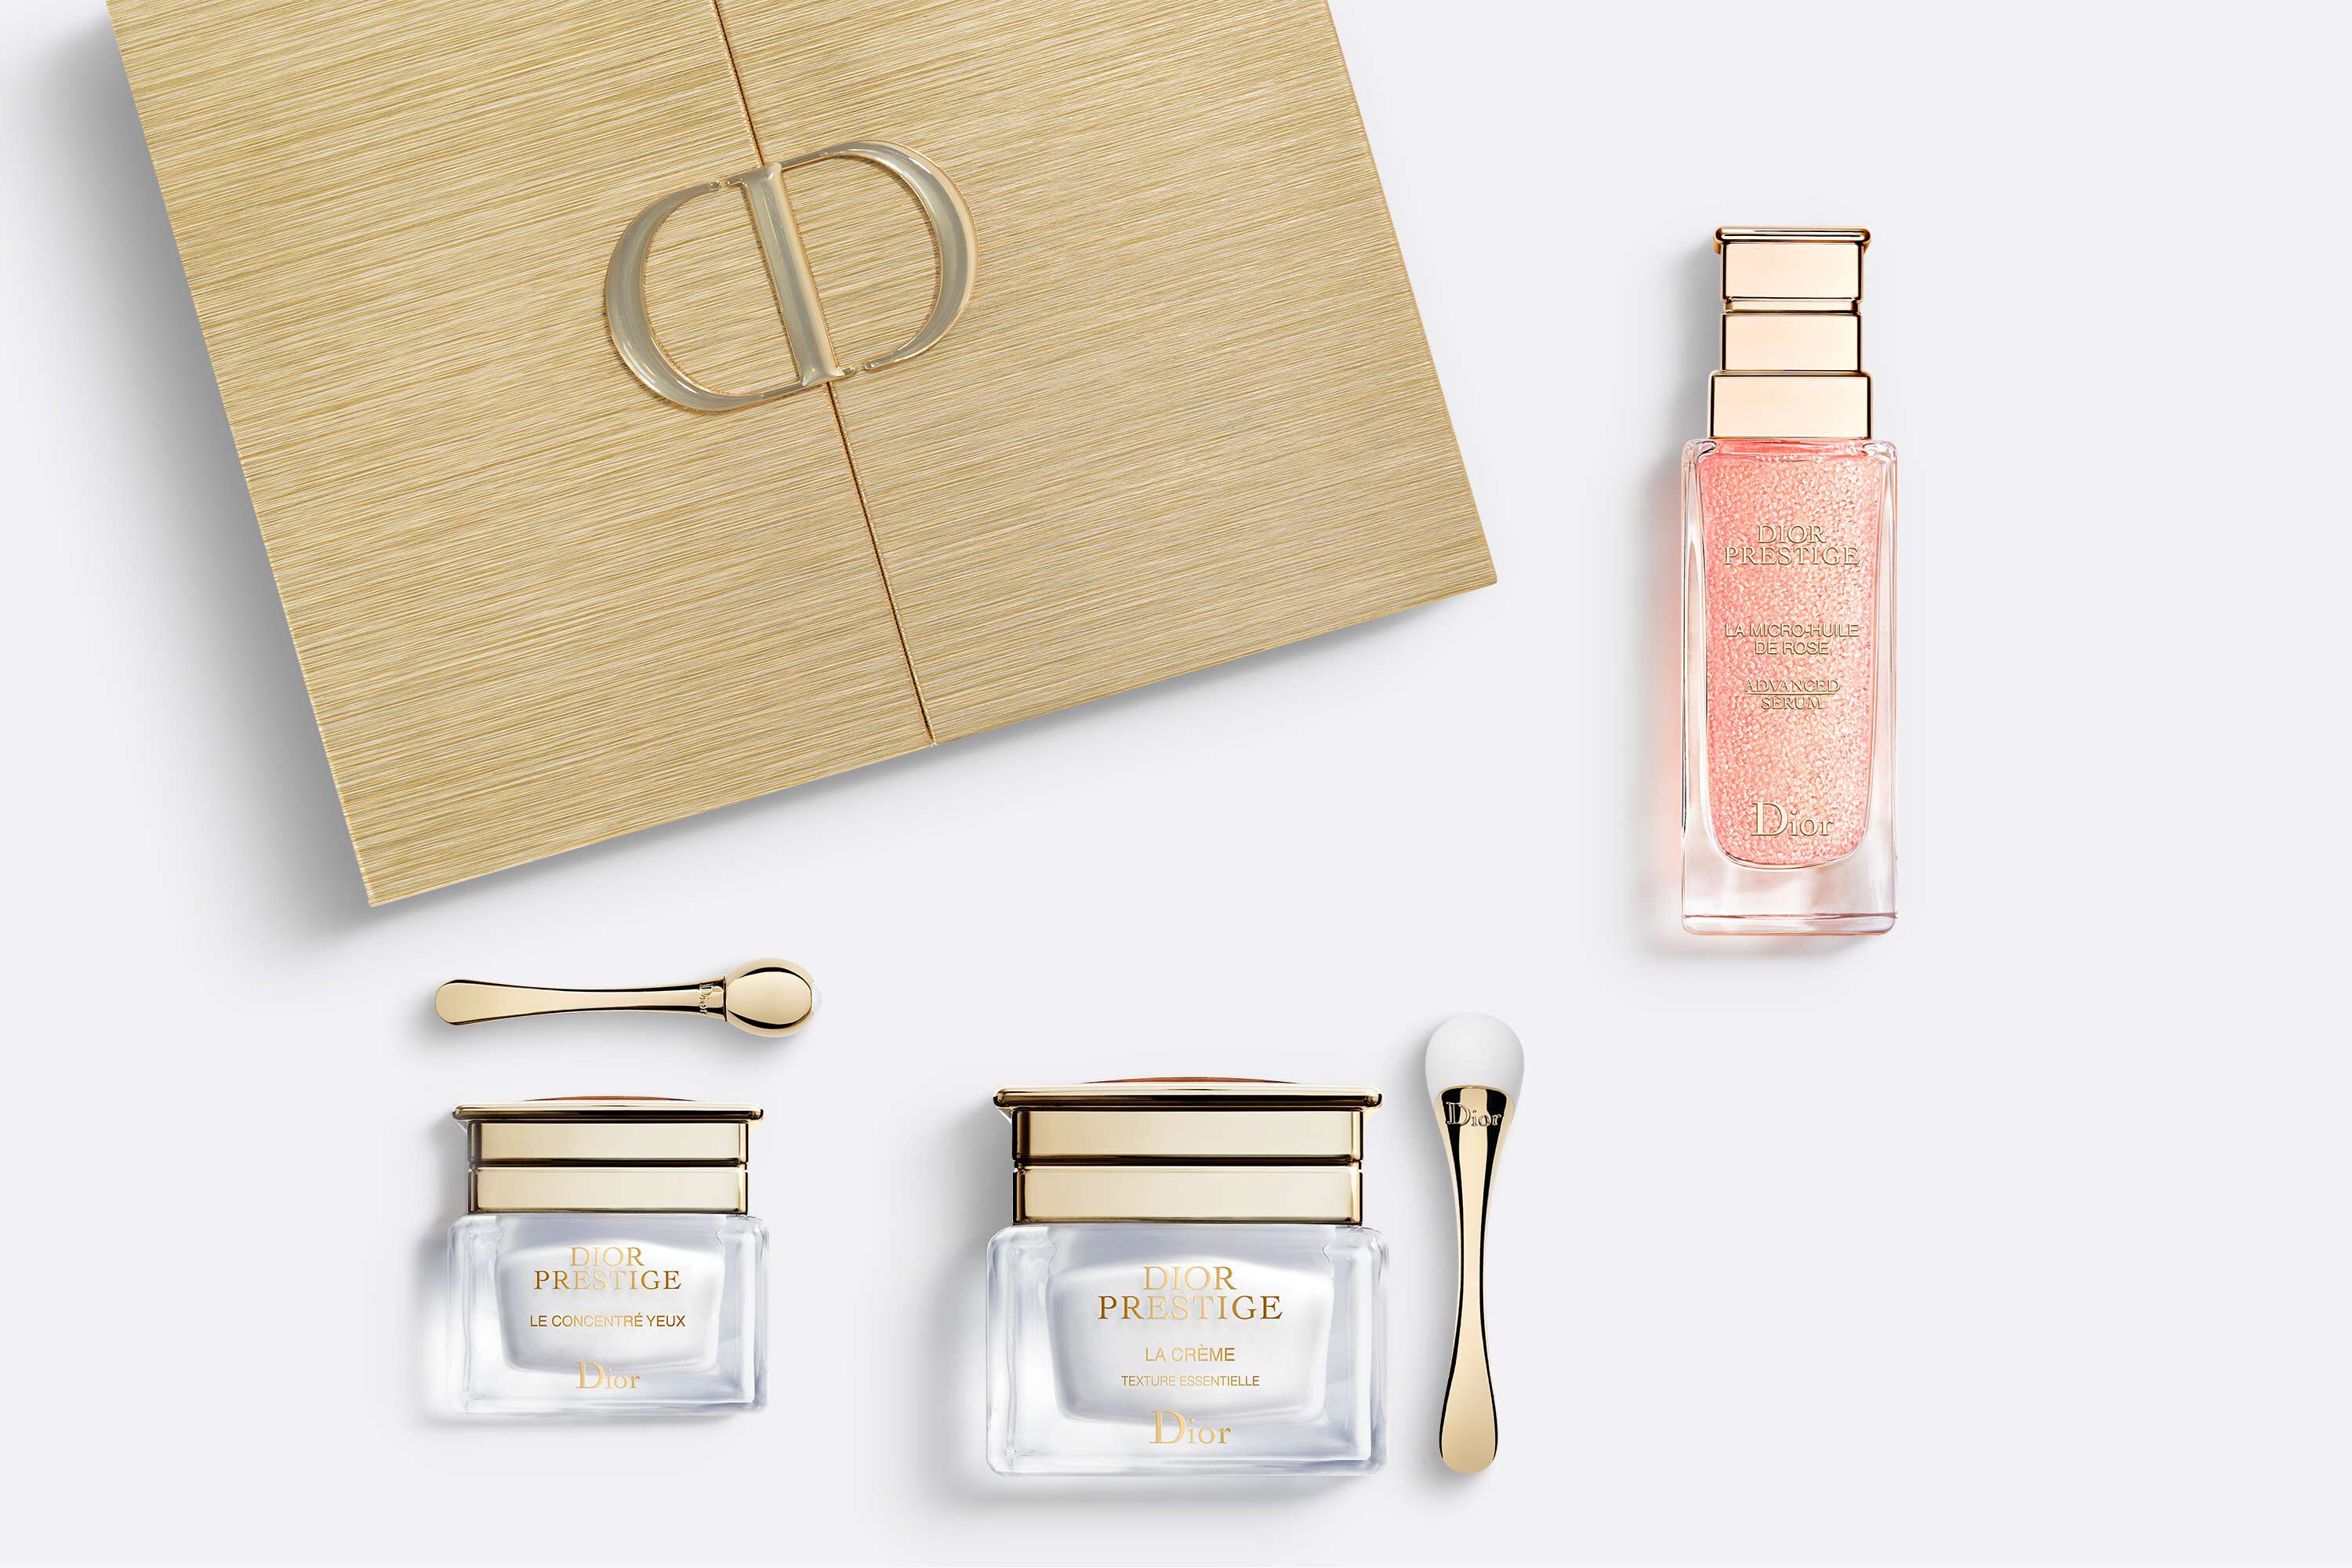 Dior Prestige: The Exceptional Regenerating and Perfecting Ritual